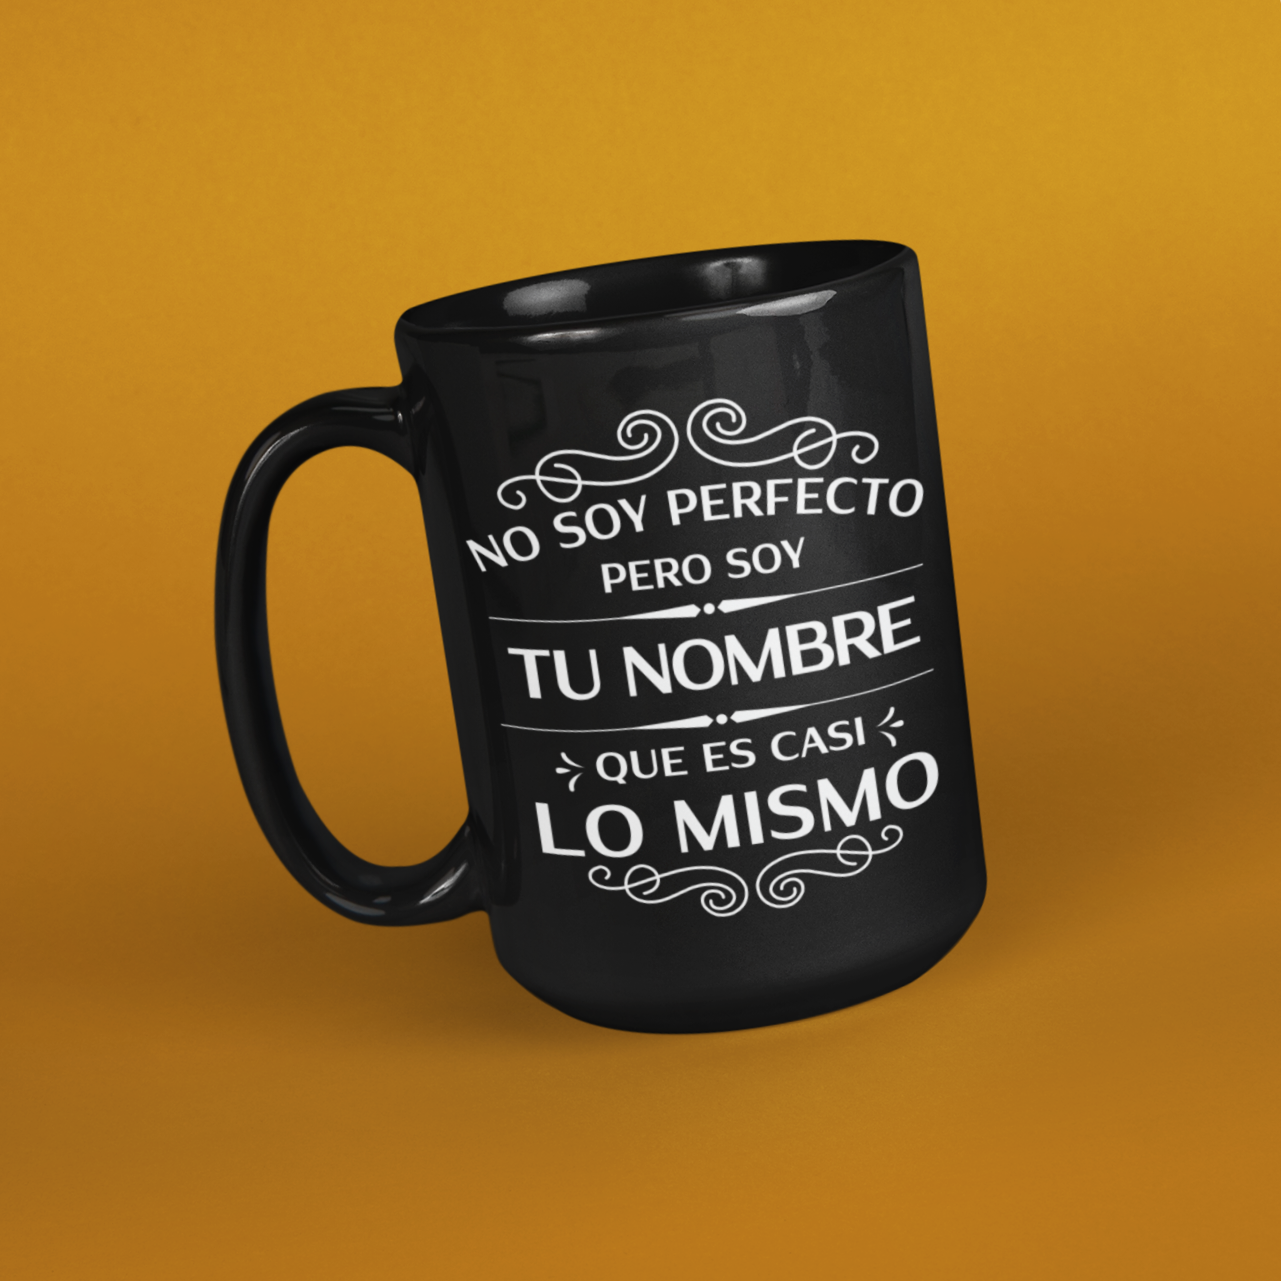 angled version of a Tall black mug for Latinos and Spanish speakers. The mug can be personalized to add someones last name (Apellido). In white lettering, the mug says "no soy perfecto, pero soy 'tu nombre' que es casi lo mismo'